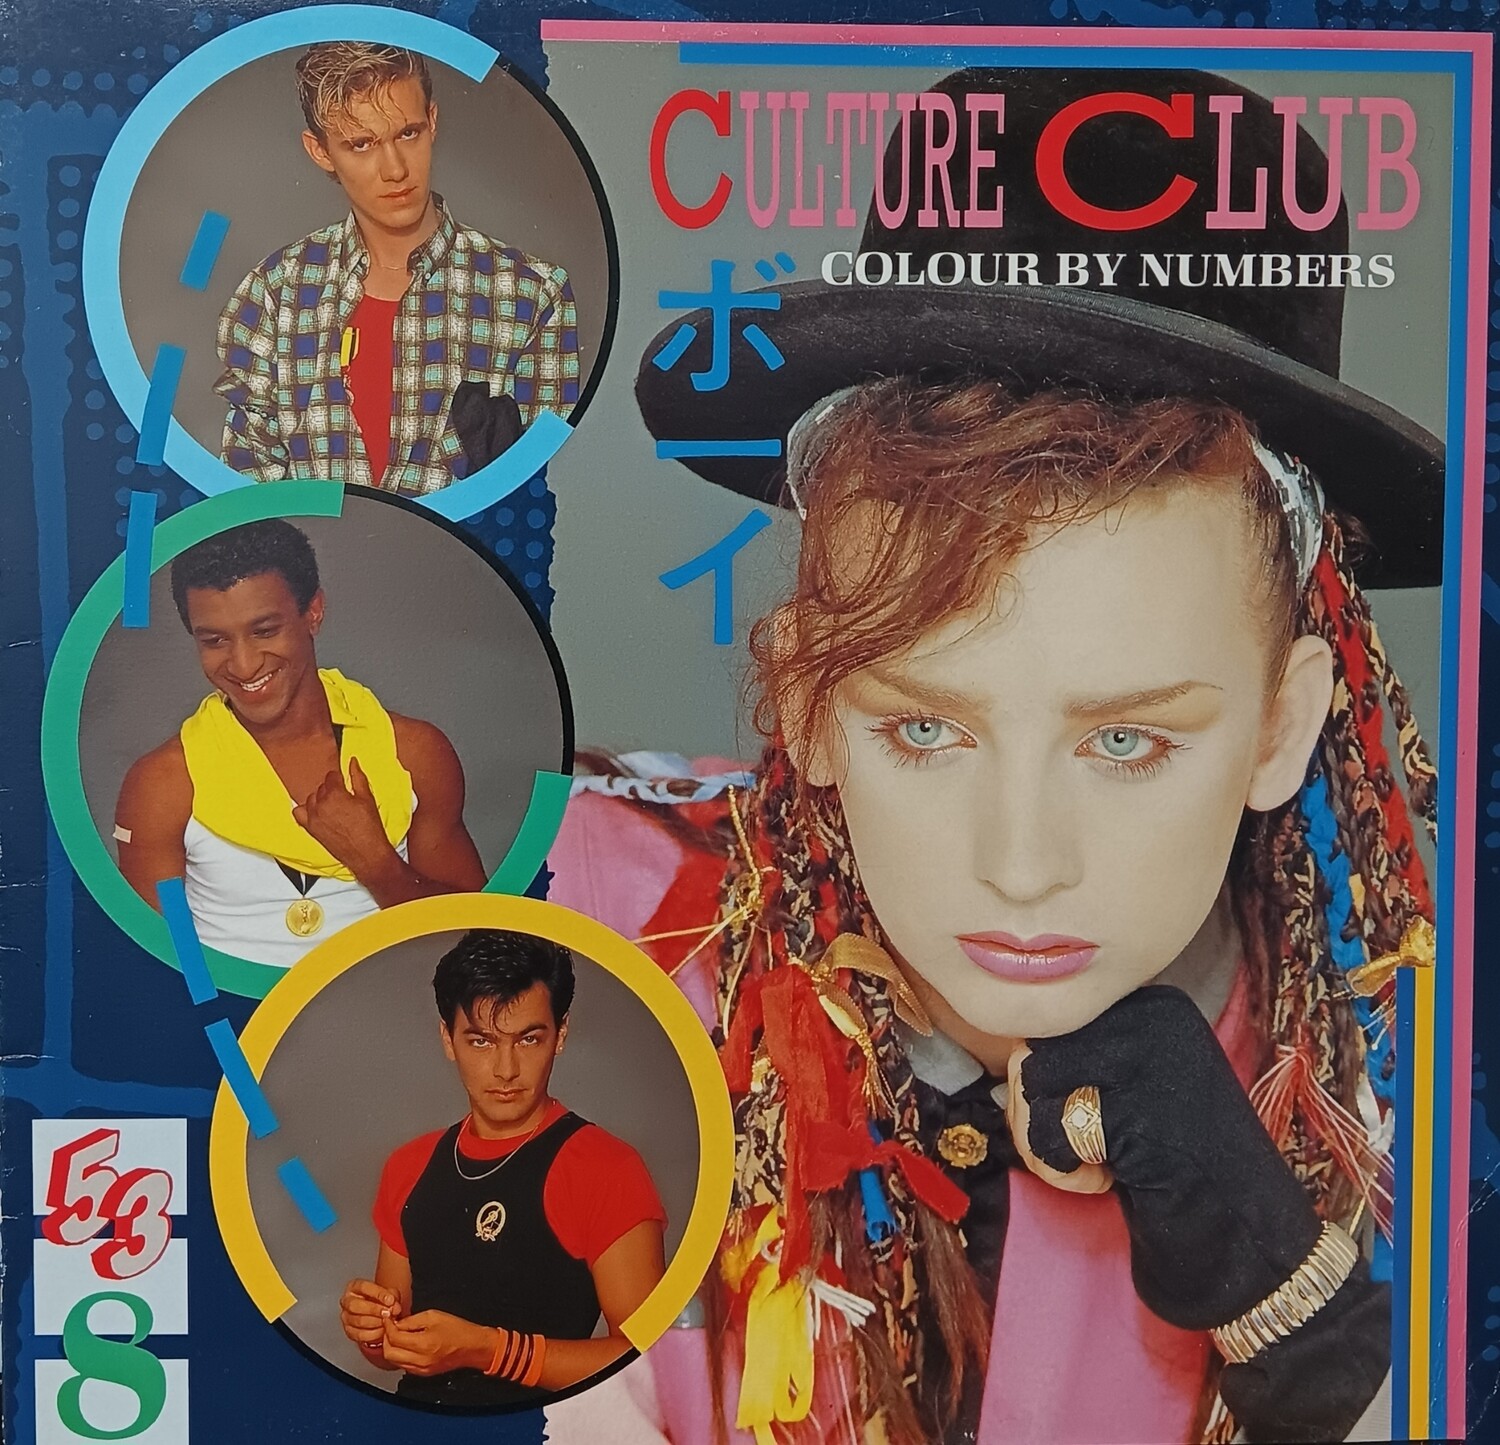 CULTURE CLUB - Colour by numbers